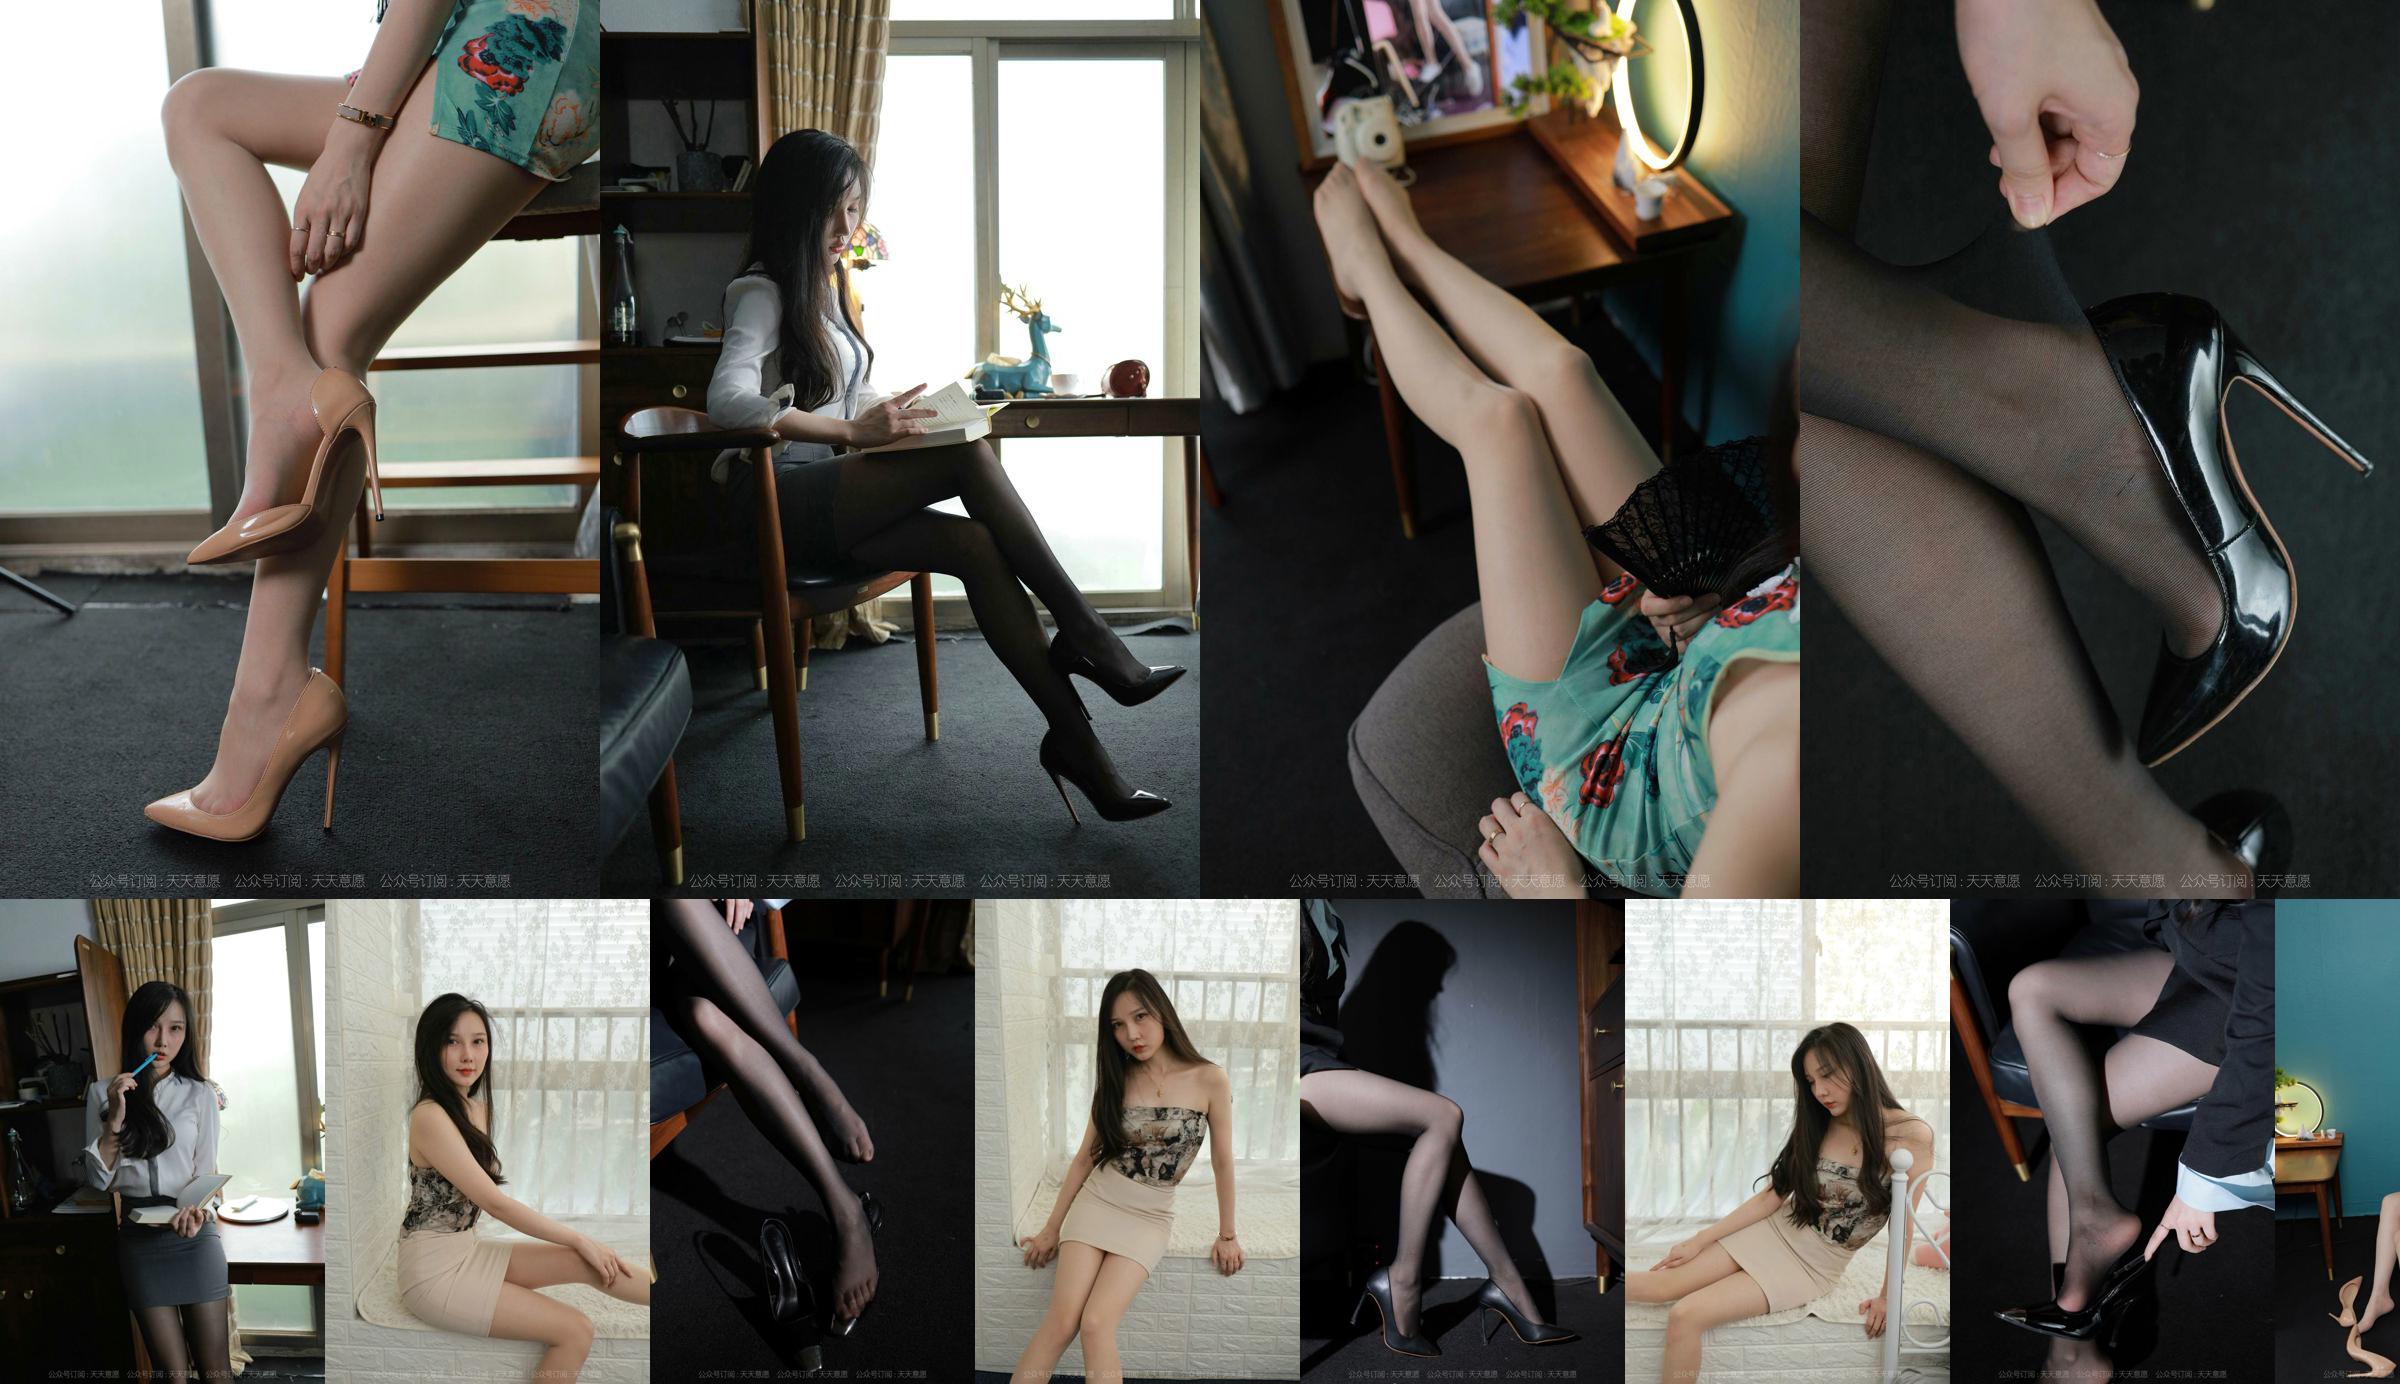 [IESS 奇思趣向] Model: Wen Xin "Sky Blue and Other Misty Rain" No.c1d907 Page 1